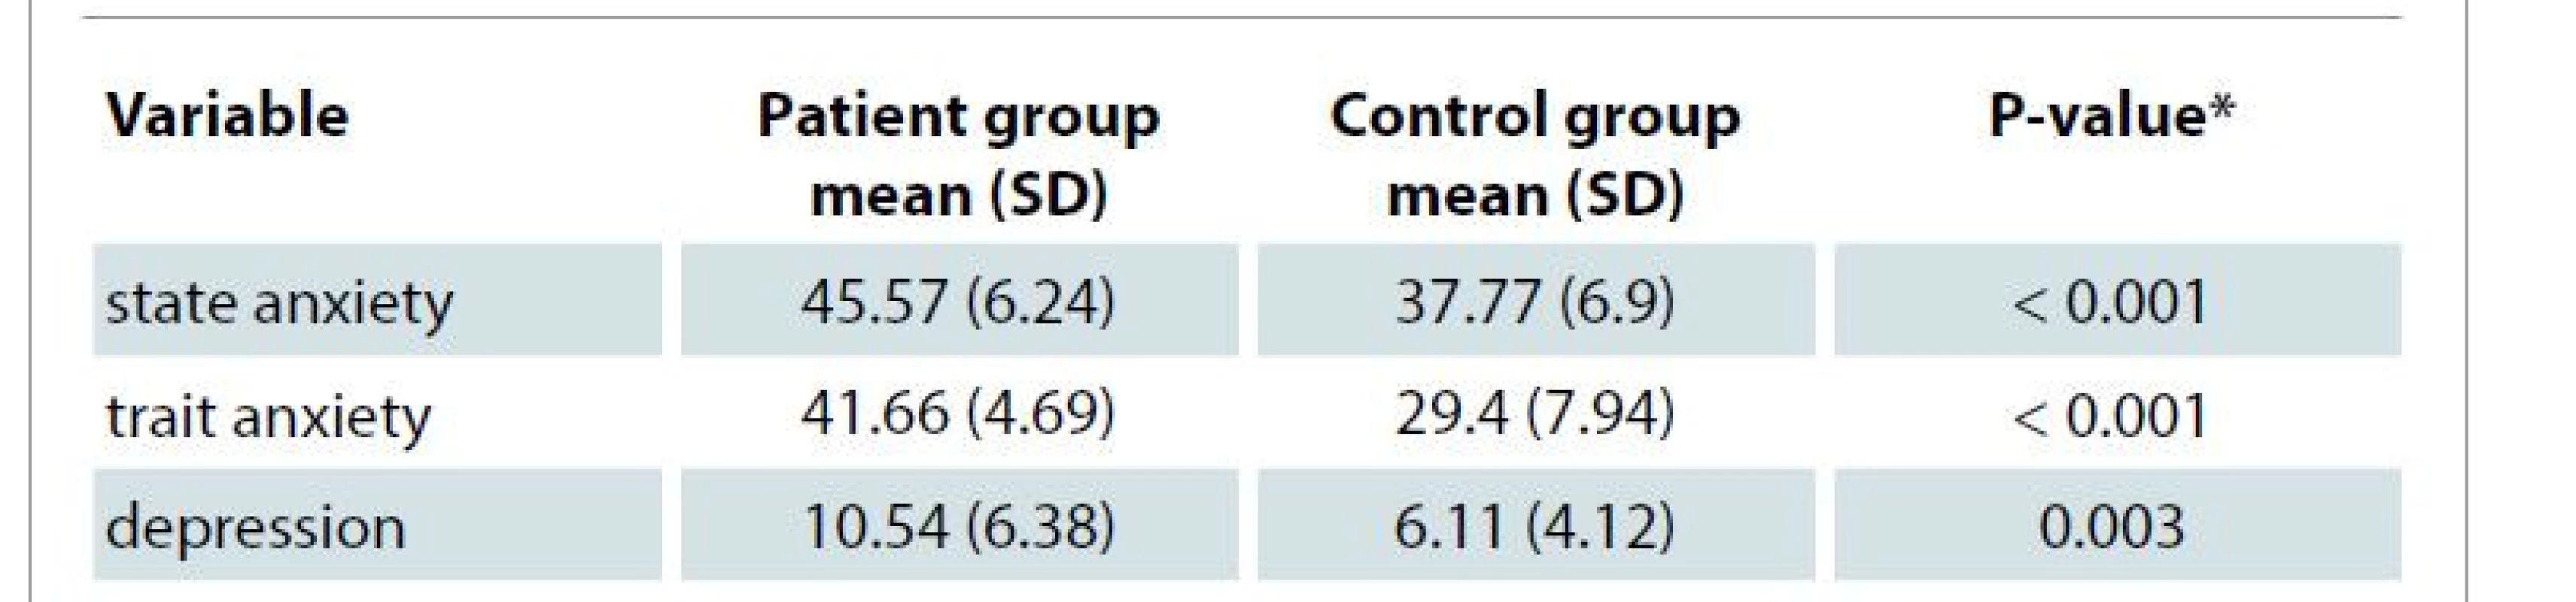 Comparison of the main variables of anxiety and depression among study
groups.